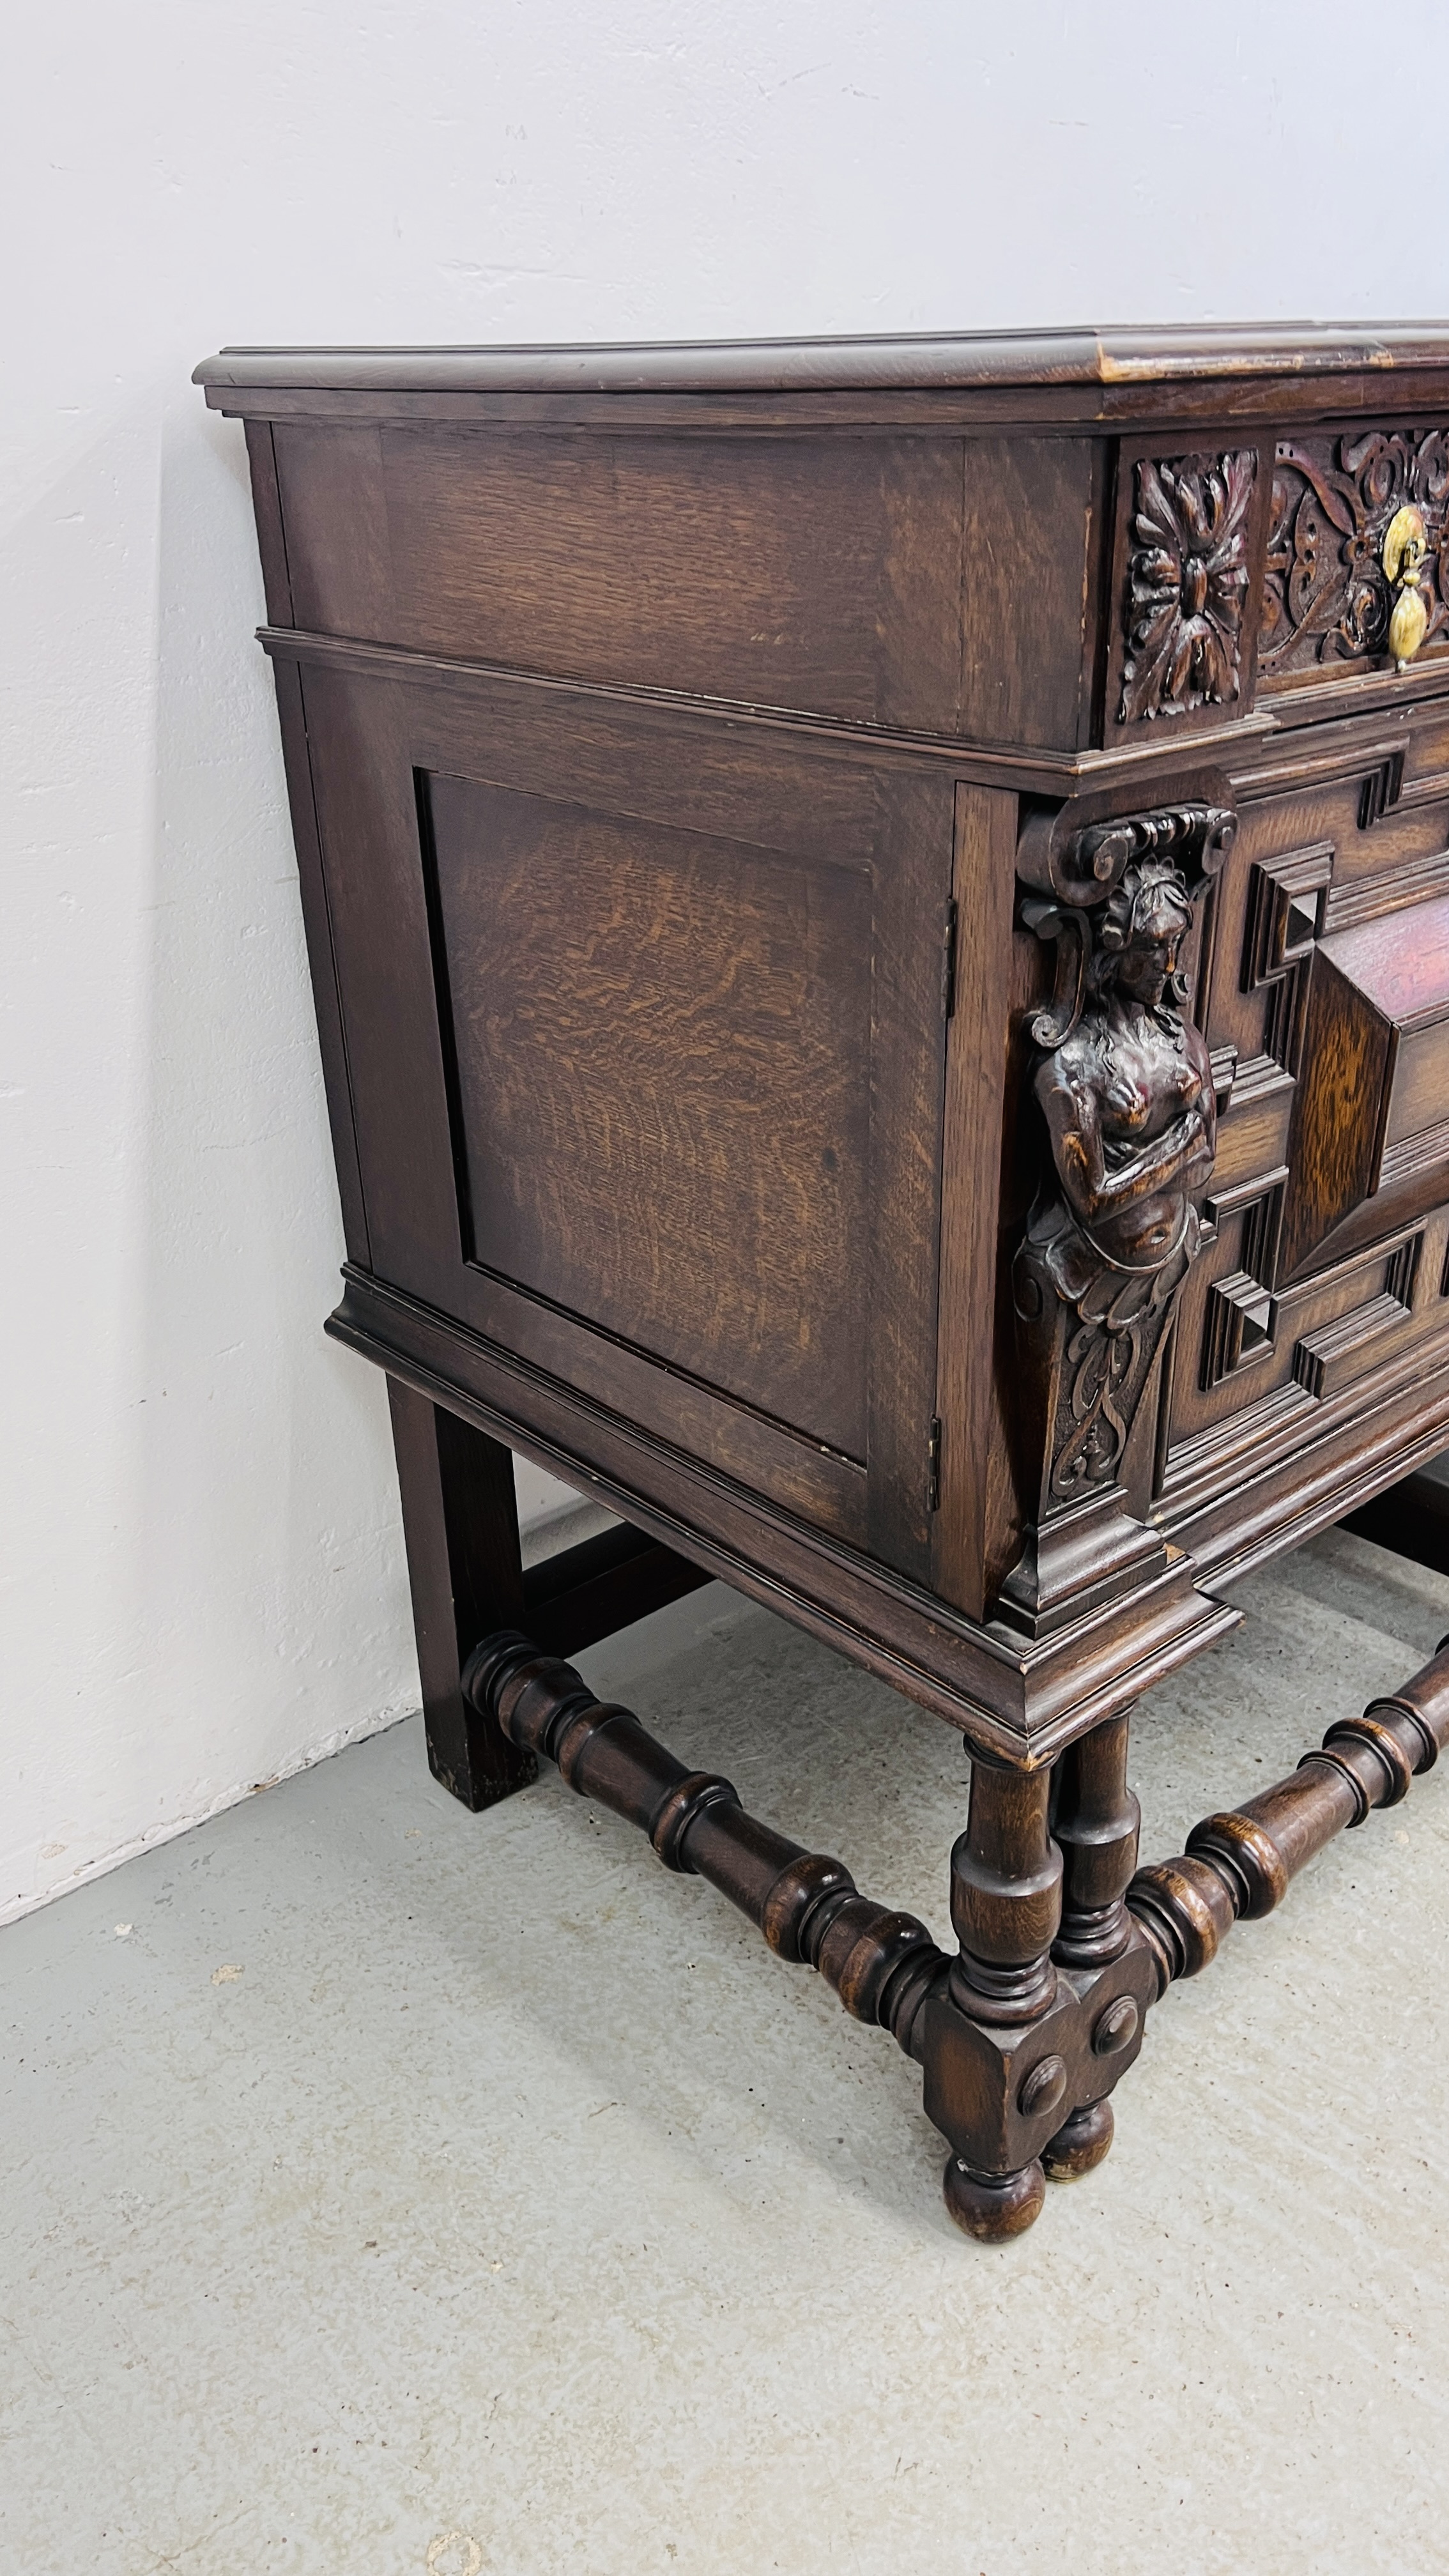 A C20TH CARVED OAK SIDEBOARD IN C17TH STYLE BY HAMPTONS OF LONDON W 198CM, D 66CM, H 101CM. - Bild 8 aus 18